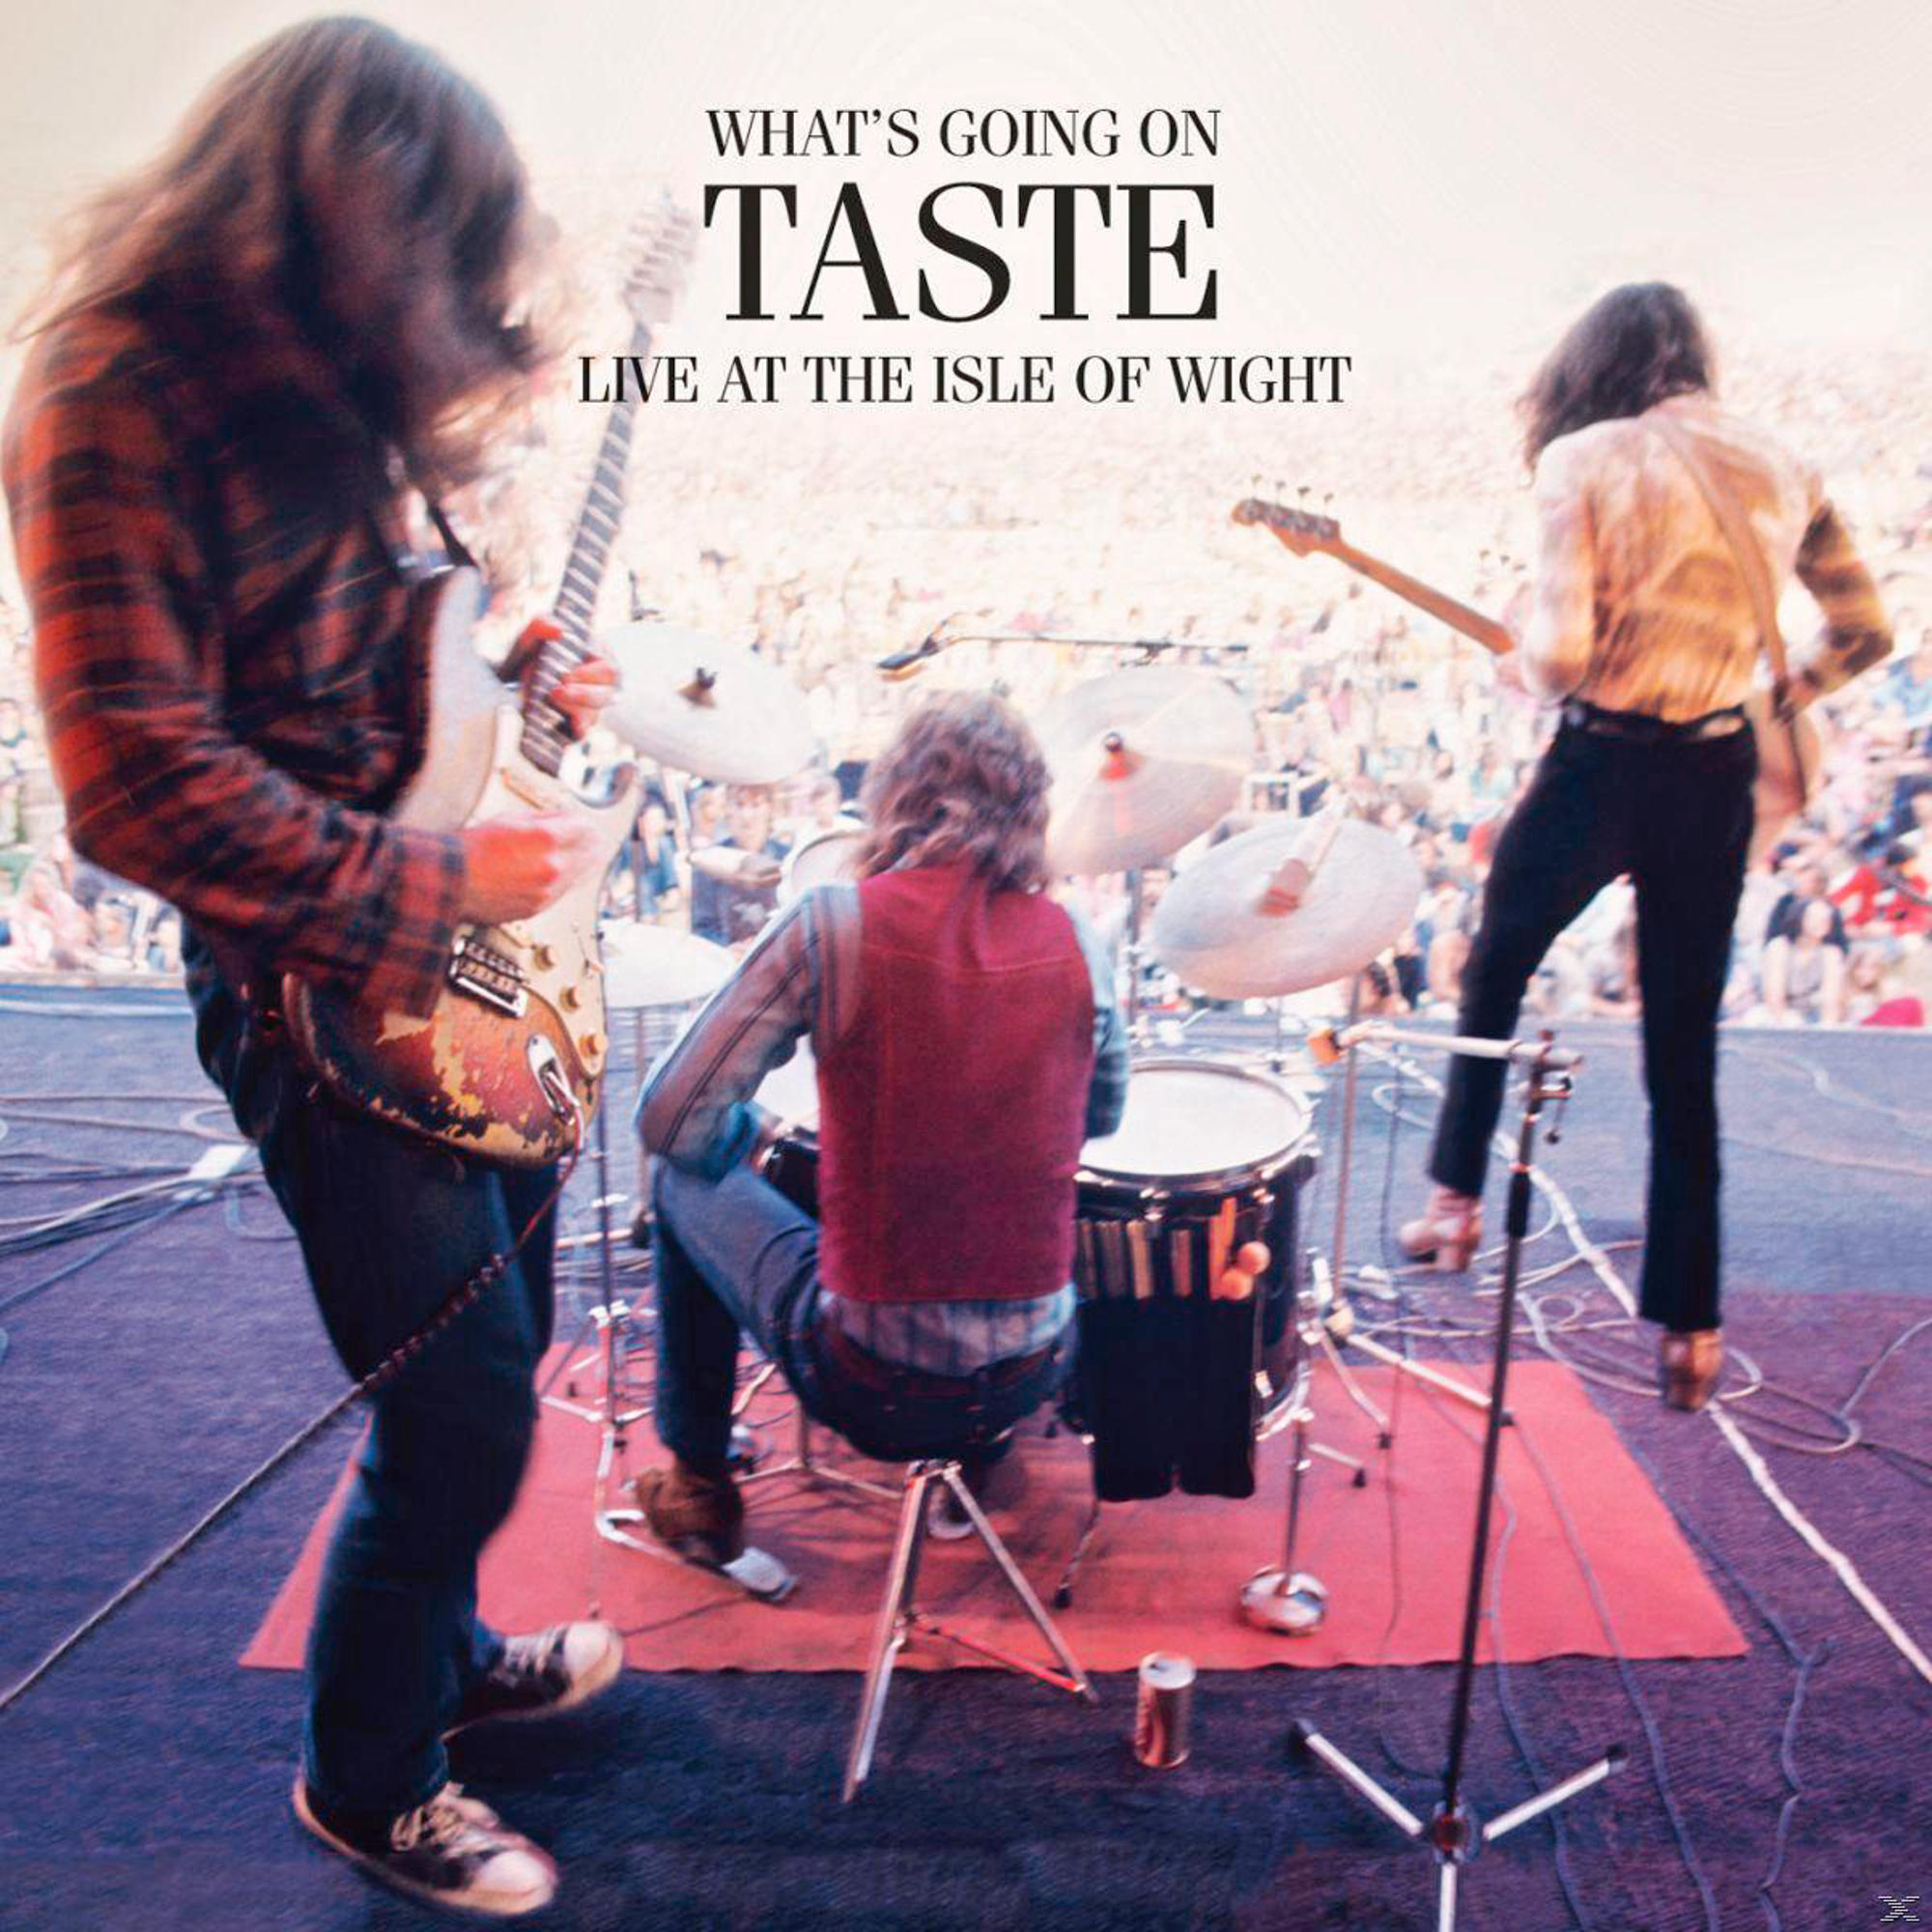 Taste - Wight What.S - Of Isle 1970 At The Going On-Live (CD)